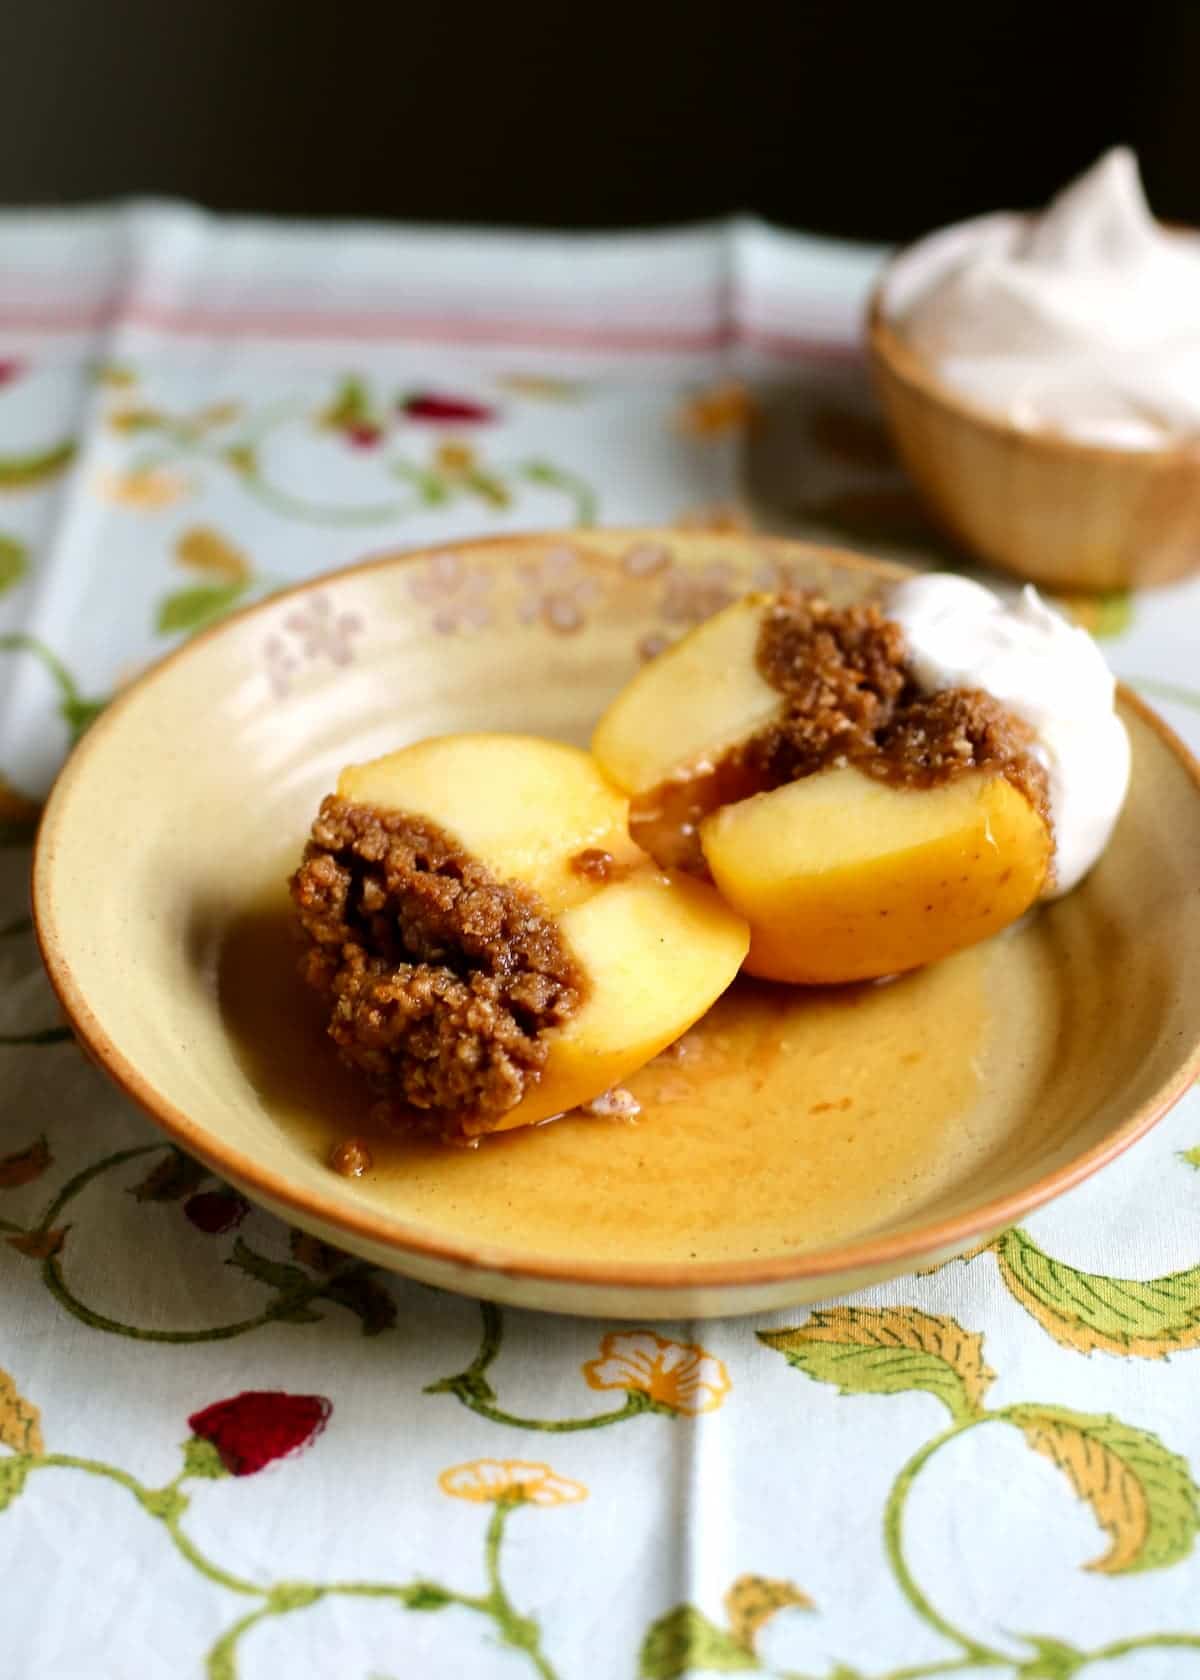 a baked apple cut in half to reveal the insides, on a yellow plate.